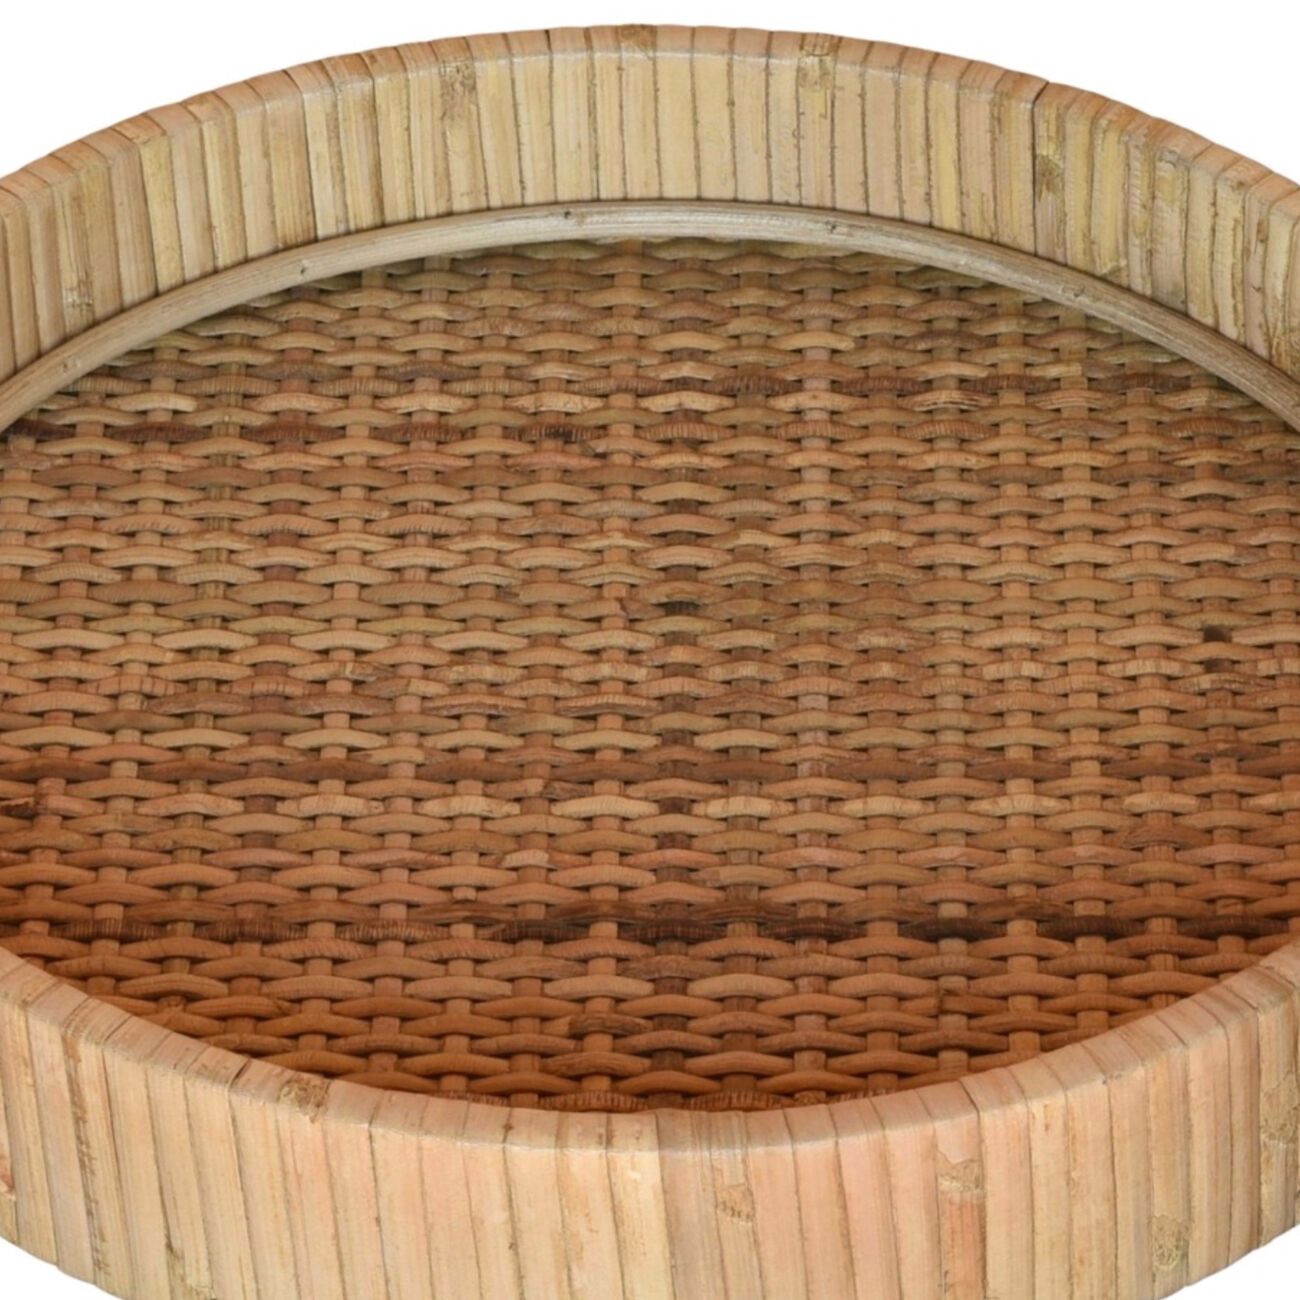 Woven Rattan Frame Round Tray, Small, Natural Brown